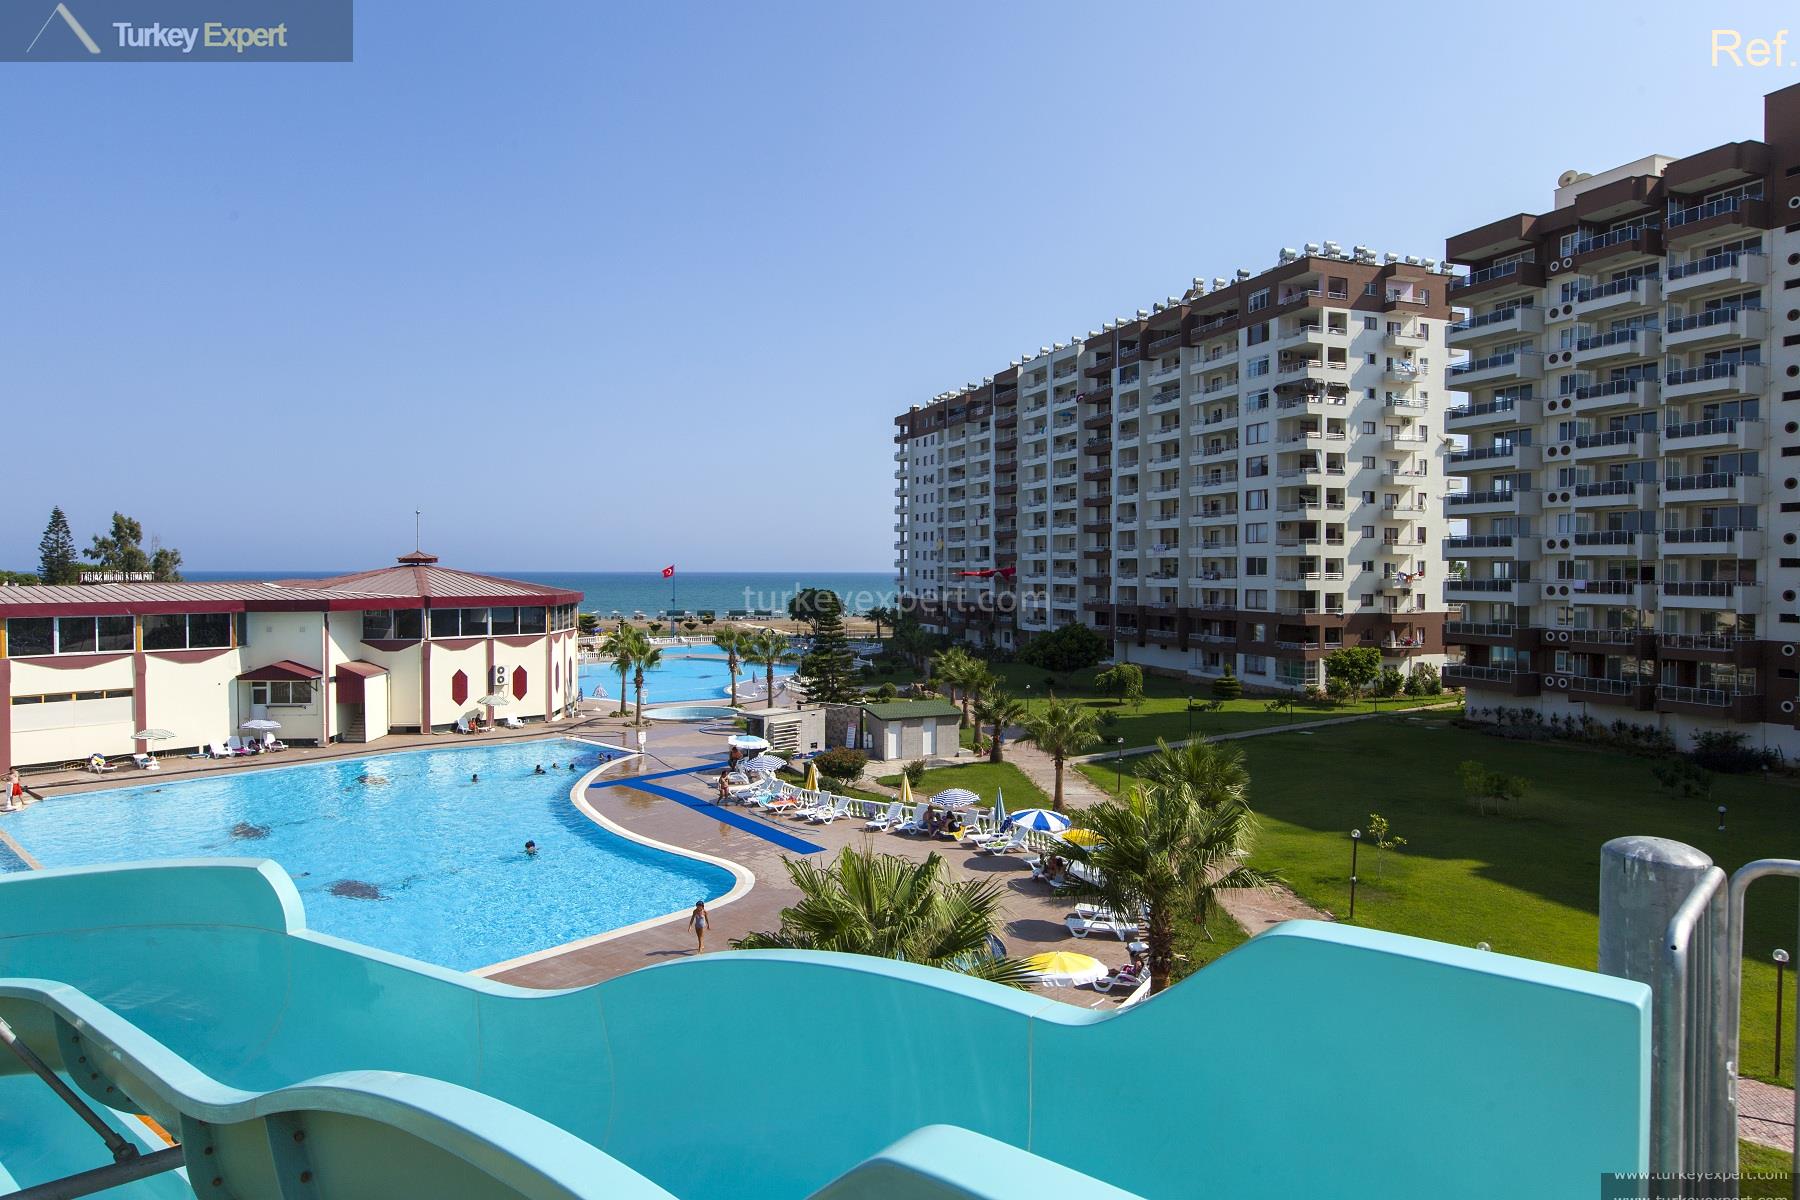 Mersin apartments right next to the sea, in a complex with 5 swimming pools 2